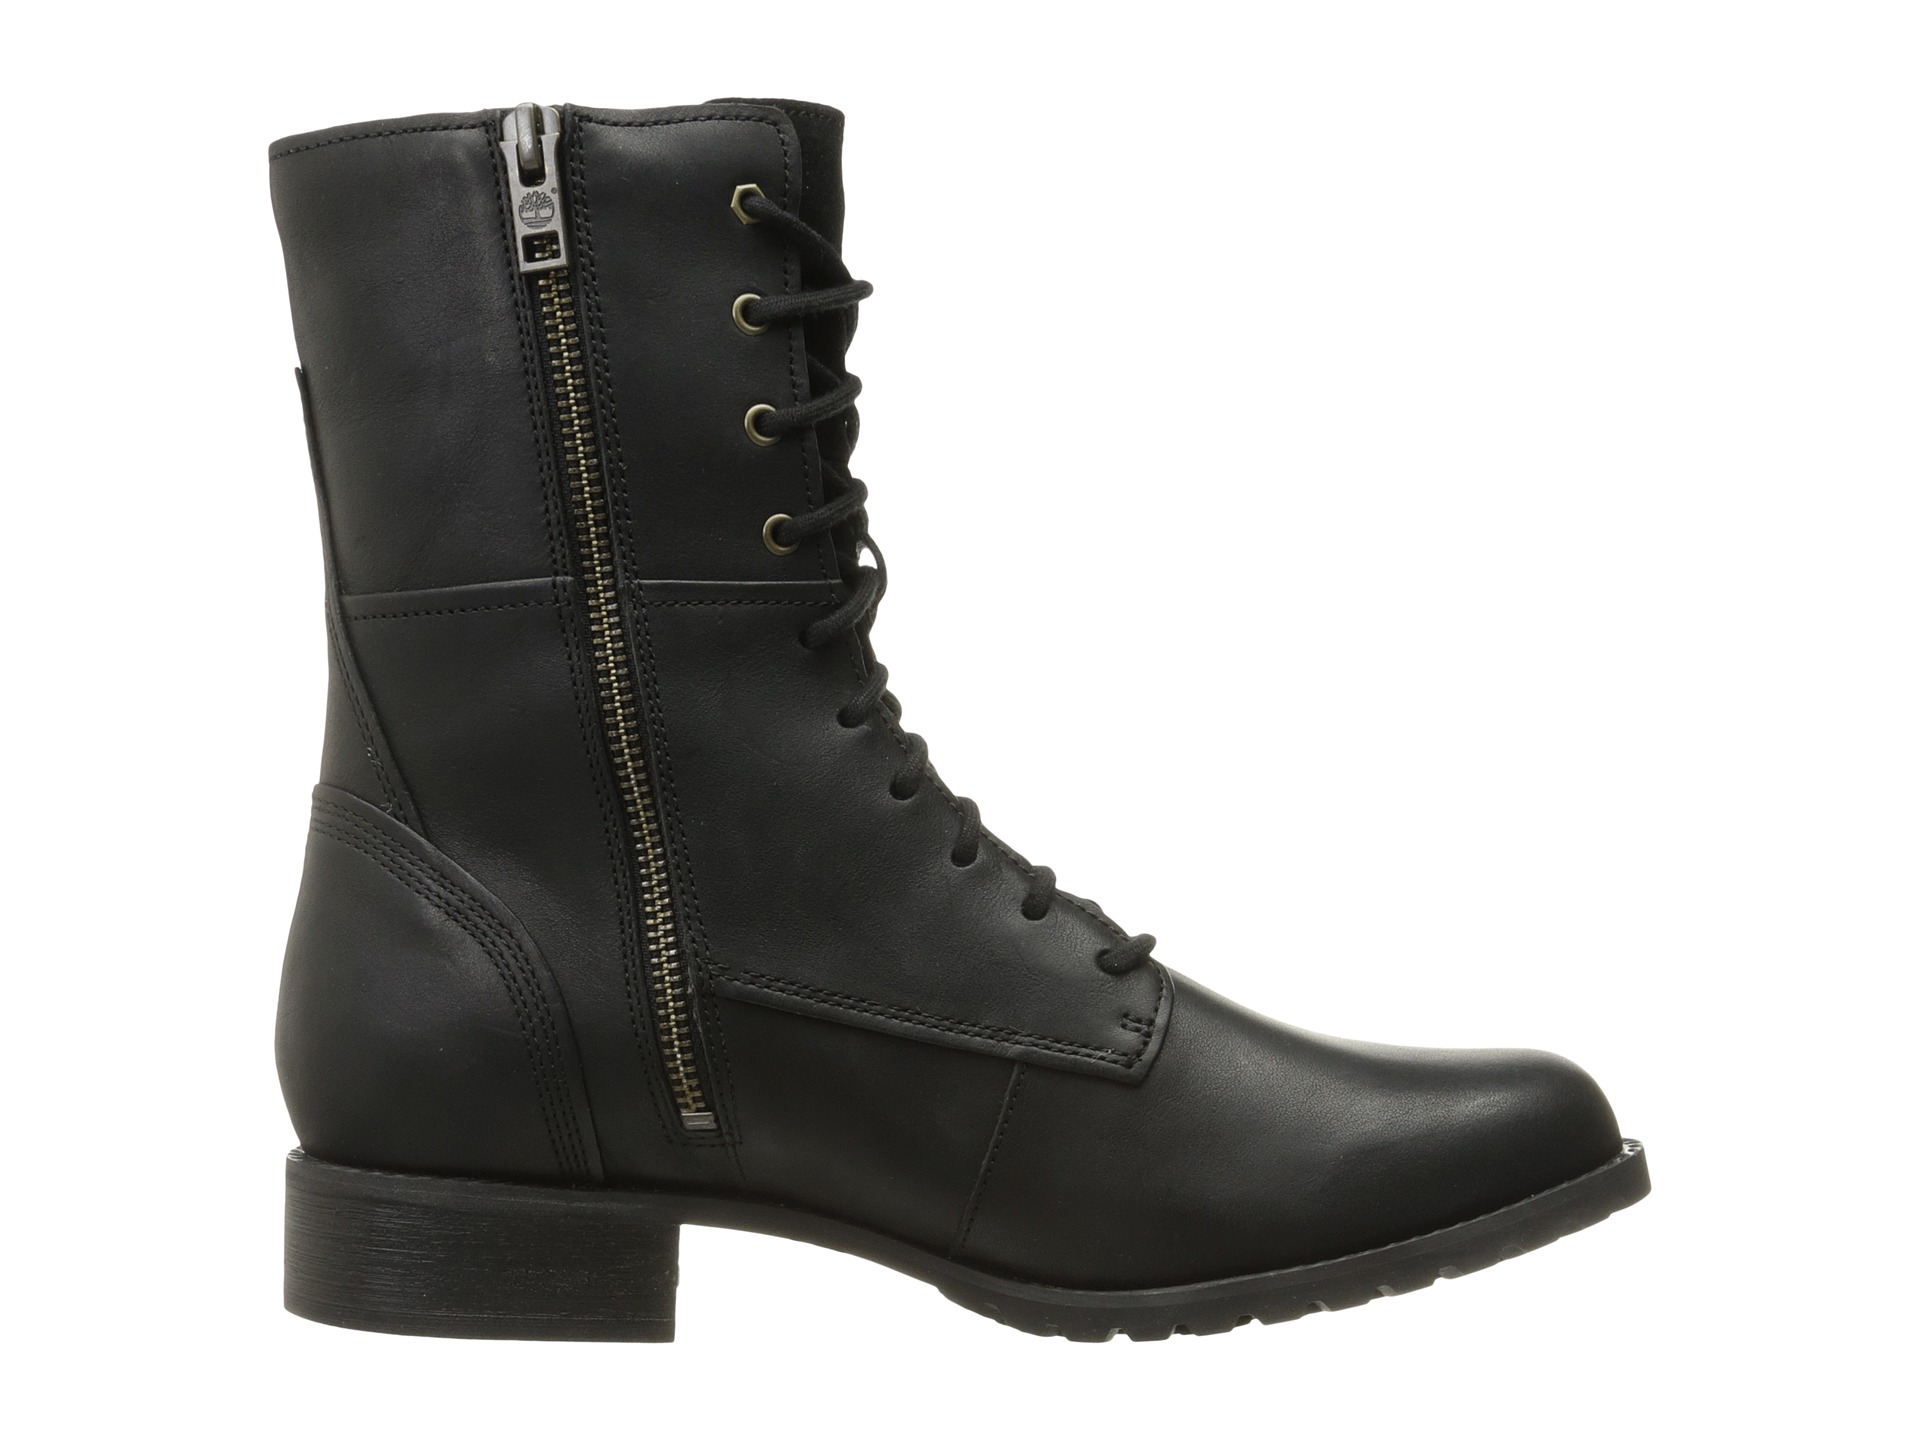 Timberland Banfield Mid Lace Boot at Zappos.com